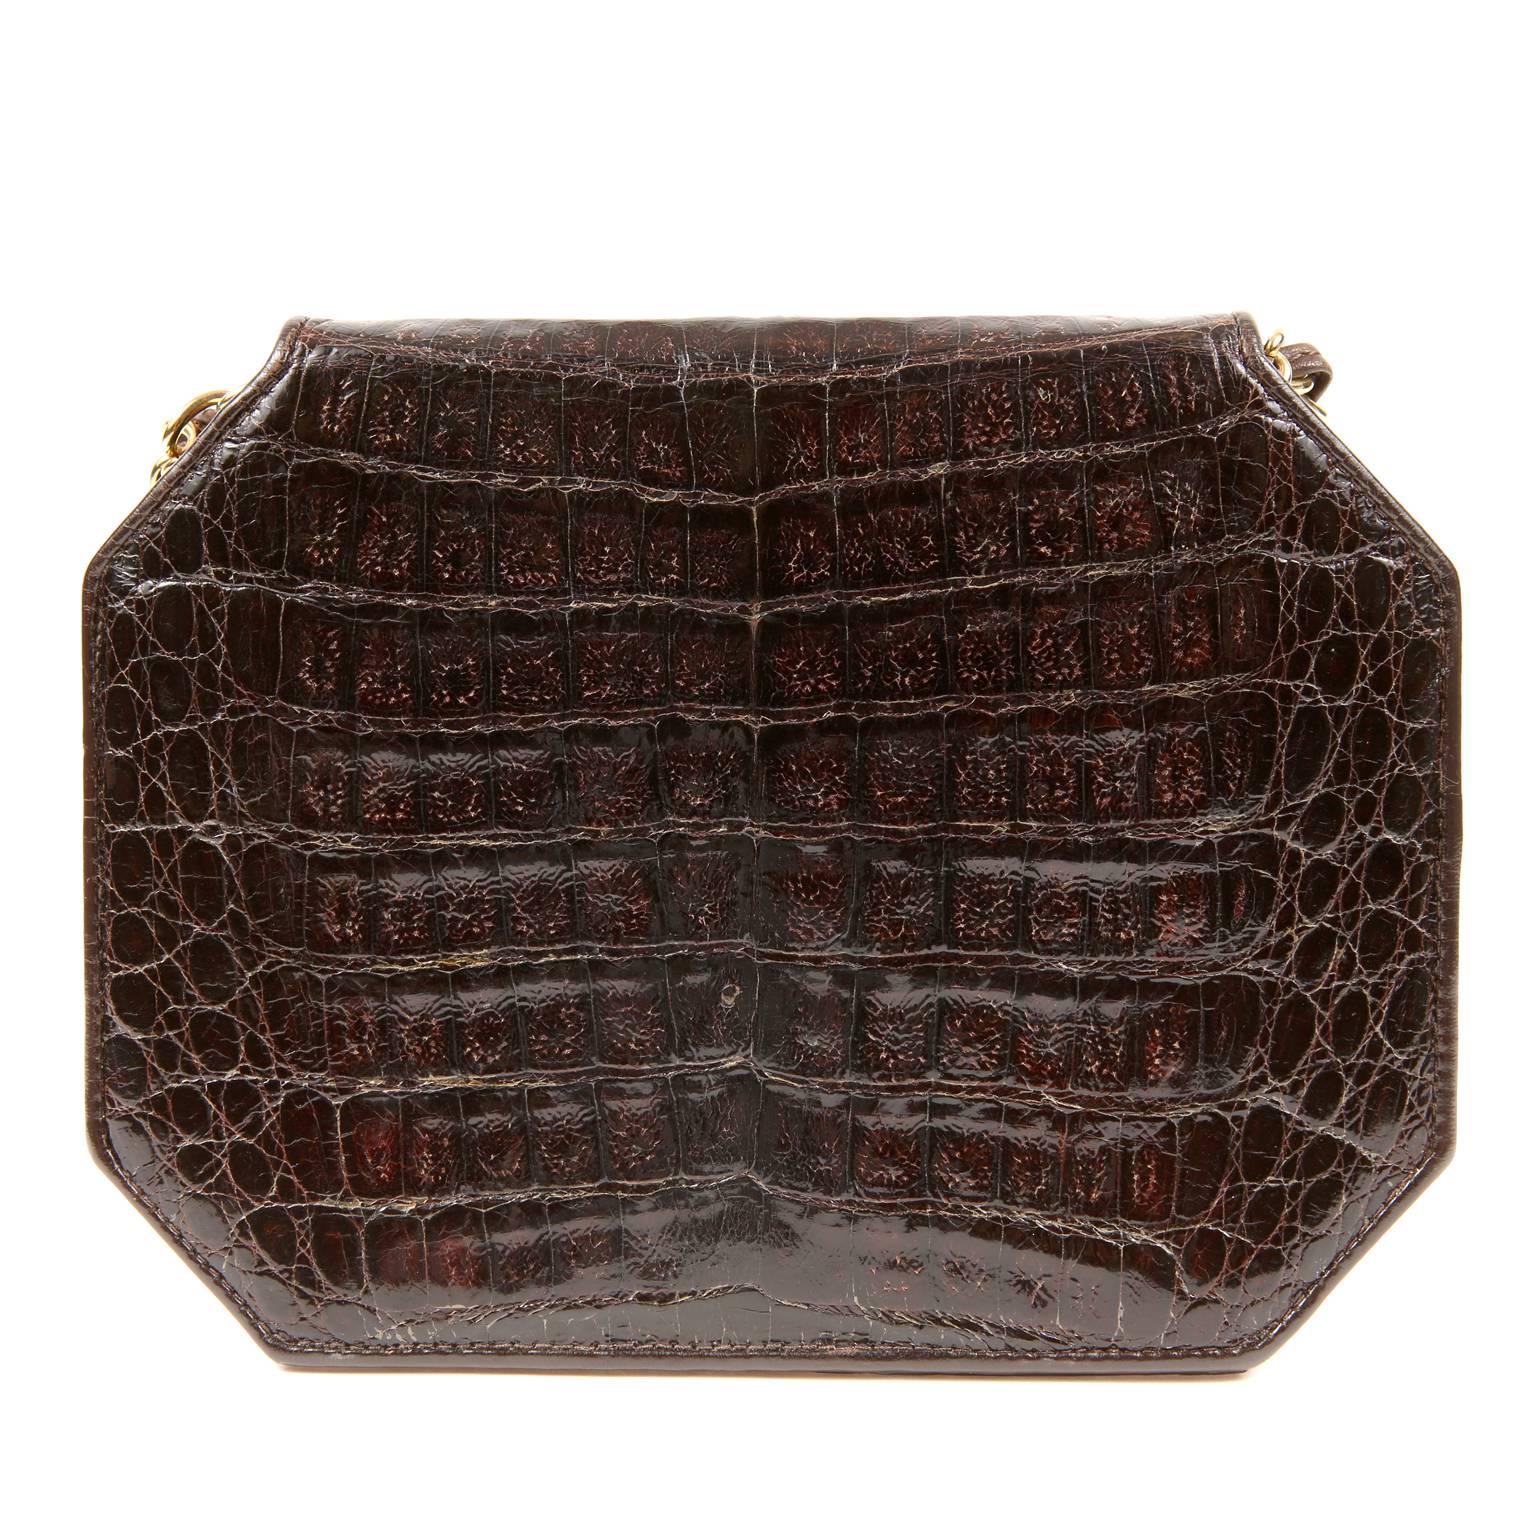 Chanel Espresso Crocodile Octagonal Bag- Excellent
  A rare vintage style, it is a beautiful addition to any collection. 

Deep espresso brown crocodile skin is structured in an octagonal shape.  Gold interlocking CC twist lock secures the front